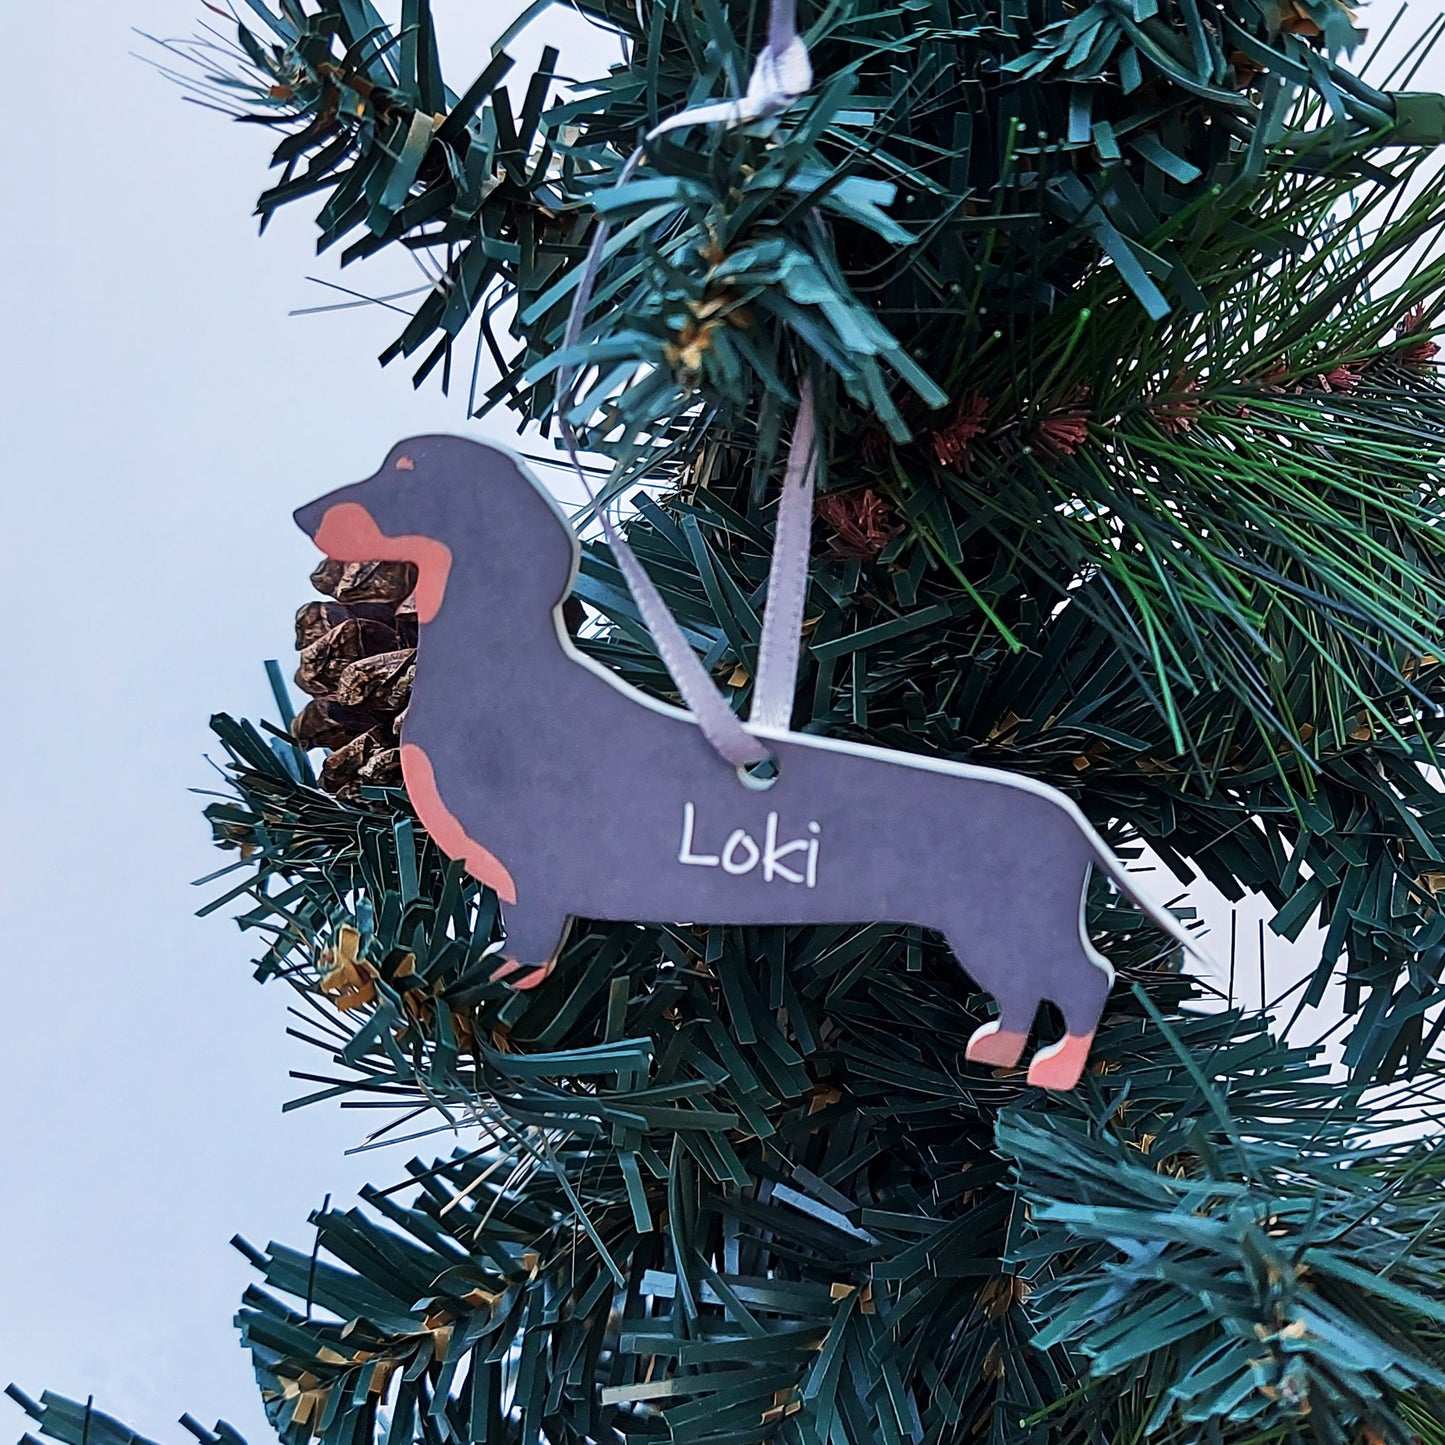 Personalised Dachshund Bauble, Christmas Tree Weiner Dog Ornament